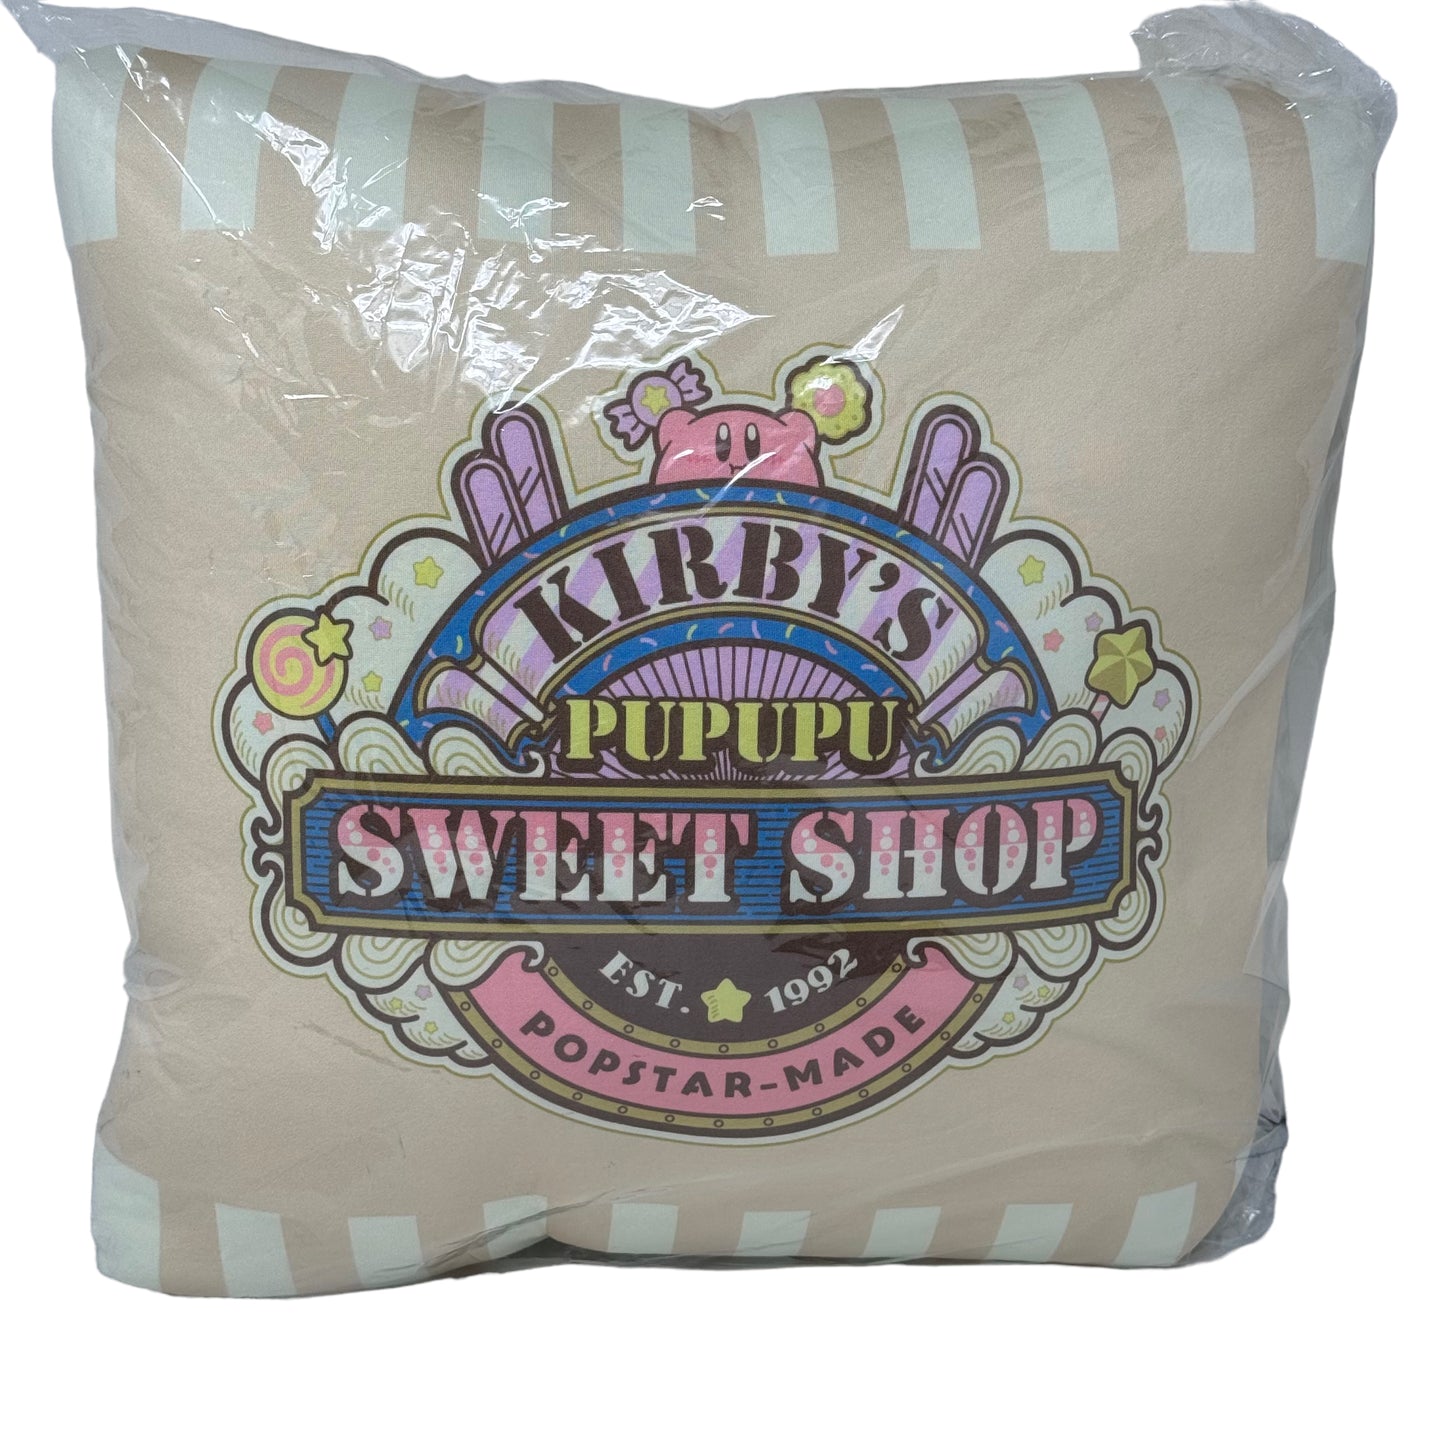 KIRBY Pupupu Sweet Shop Large Puffy Cushion / Pillow (BRAND NEW) Limited 3D Type